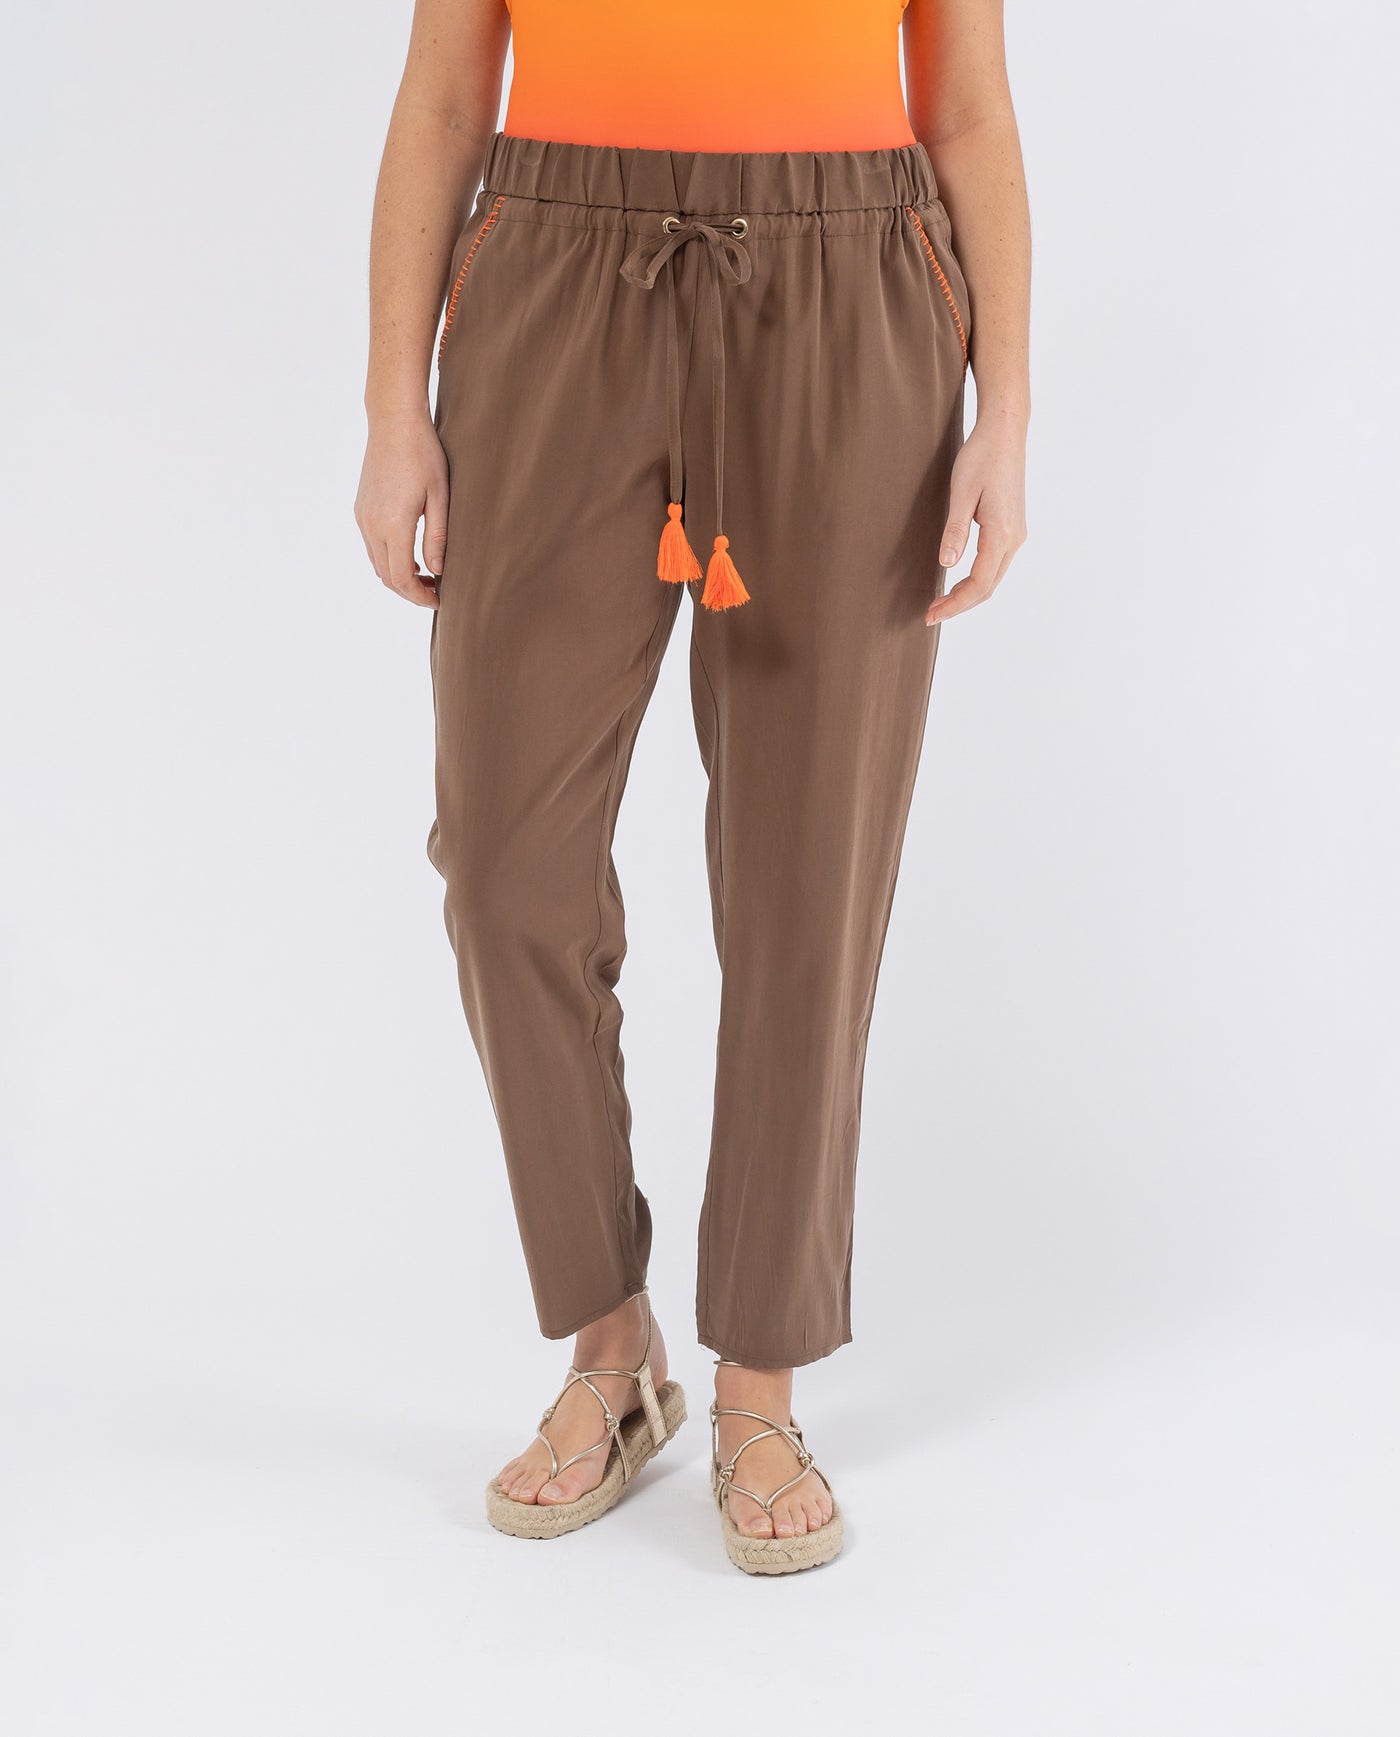 PAJAMAS PANTS WITH EMBROIDERY BROWN POCKETS